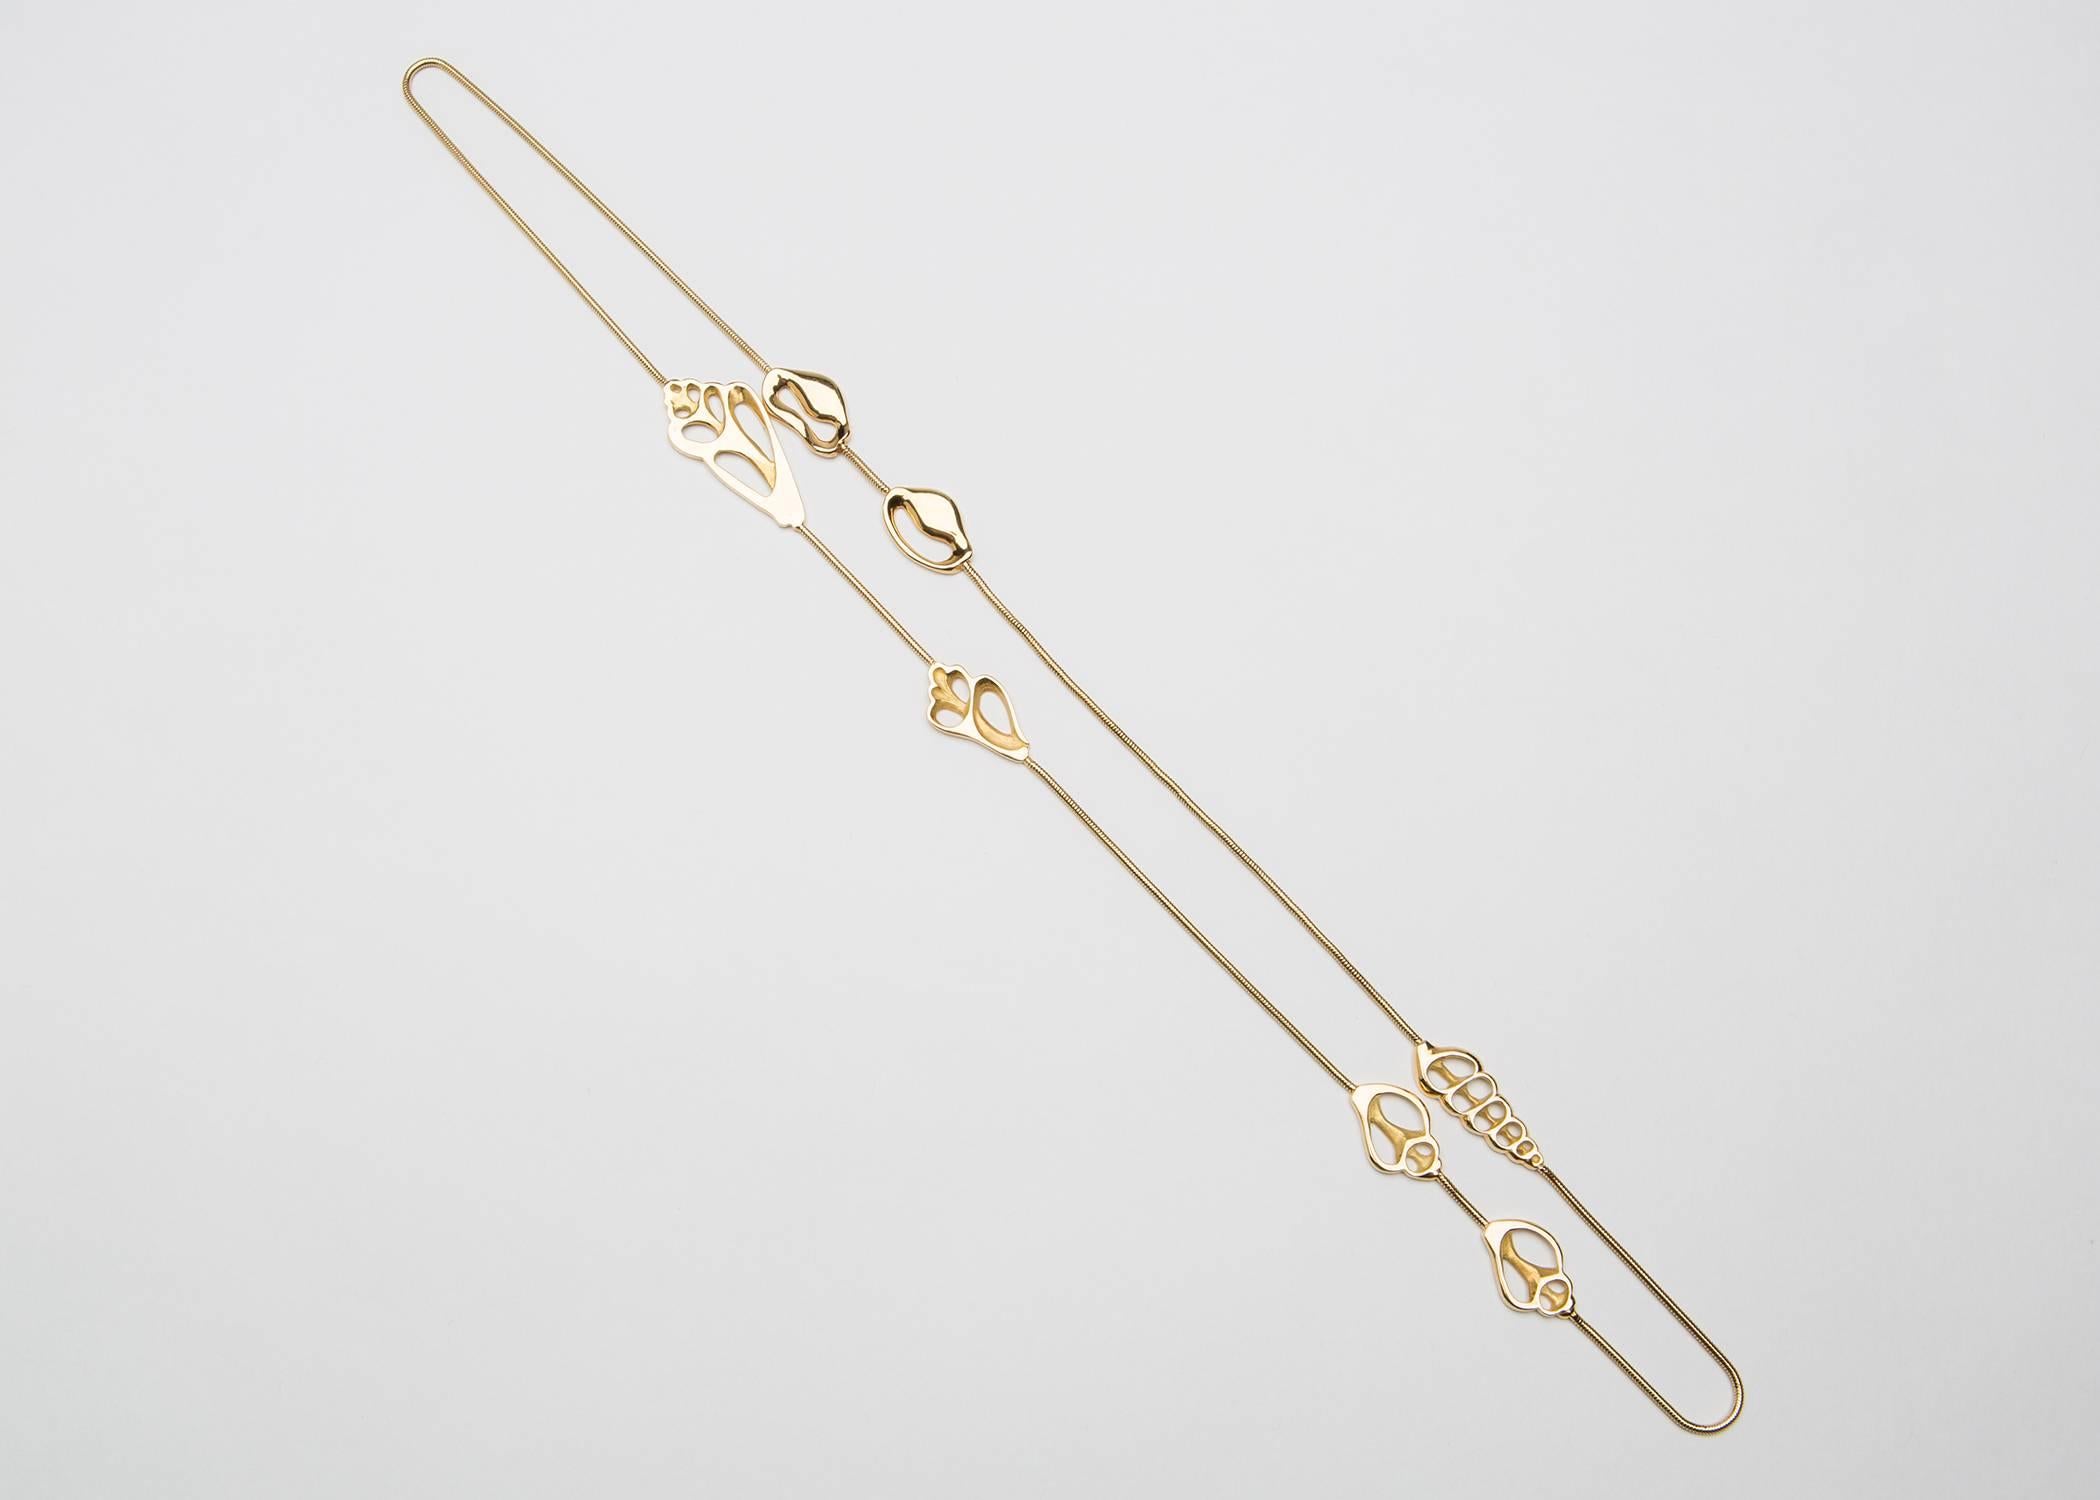 Seven seashell slices combine to create an elegant and playful necklace. Angela Cummings Iconic designs created for Tiffany & Co. are very special and collectable. This is an early rarely available piece. 30 inches in length 43 grams of 18k gold